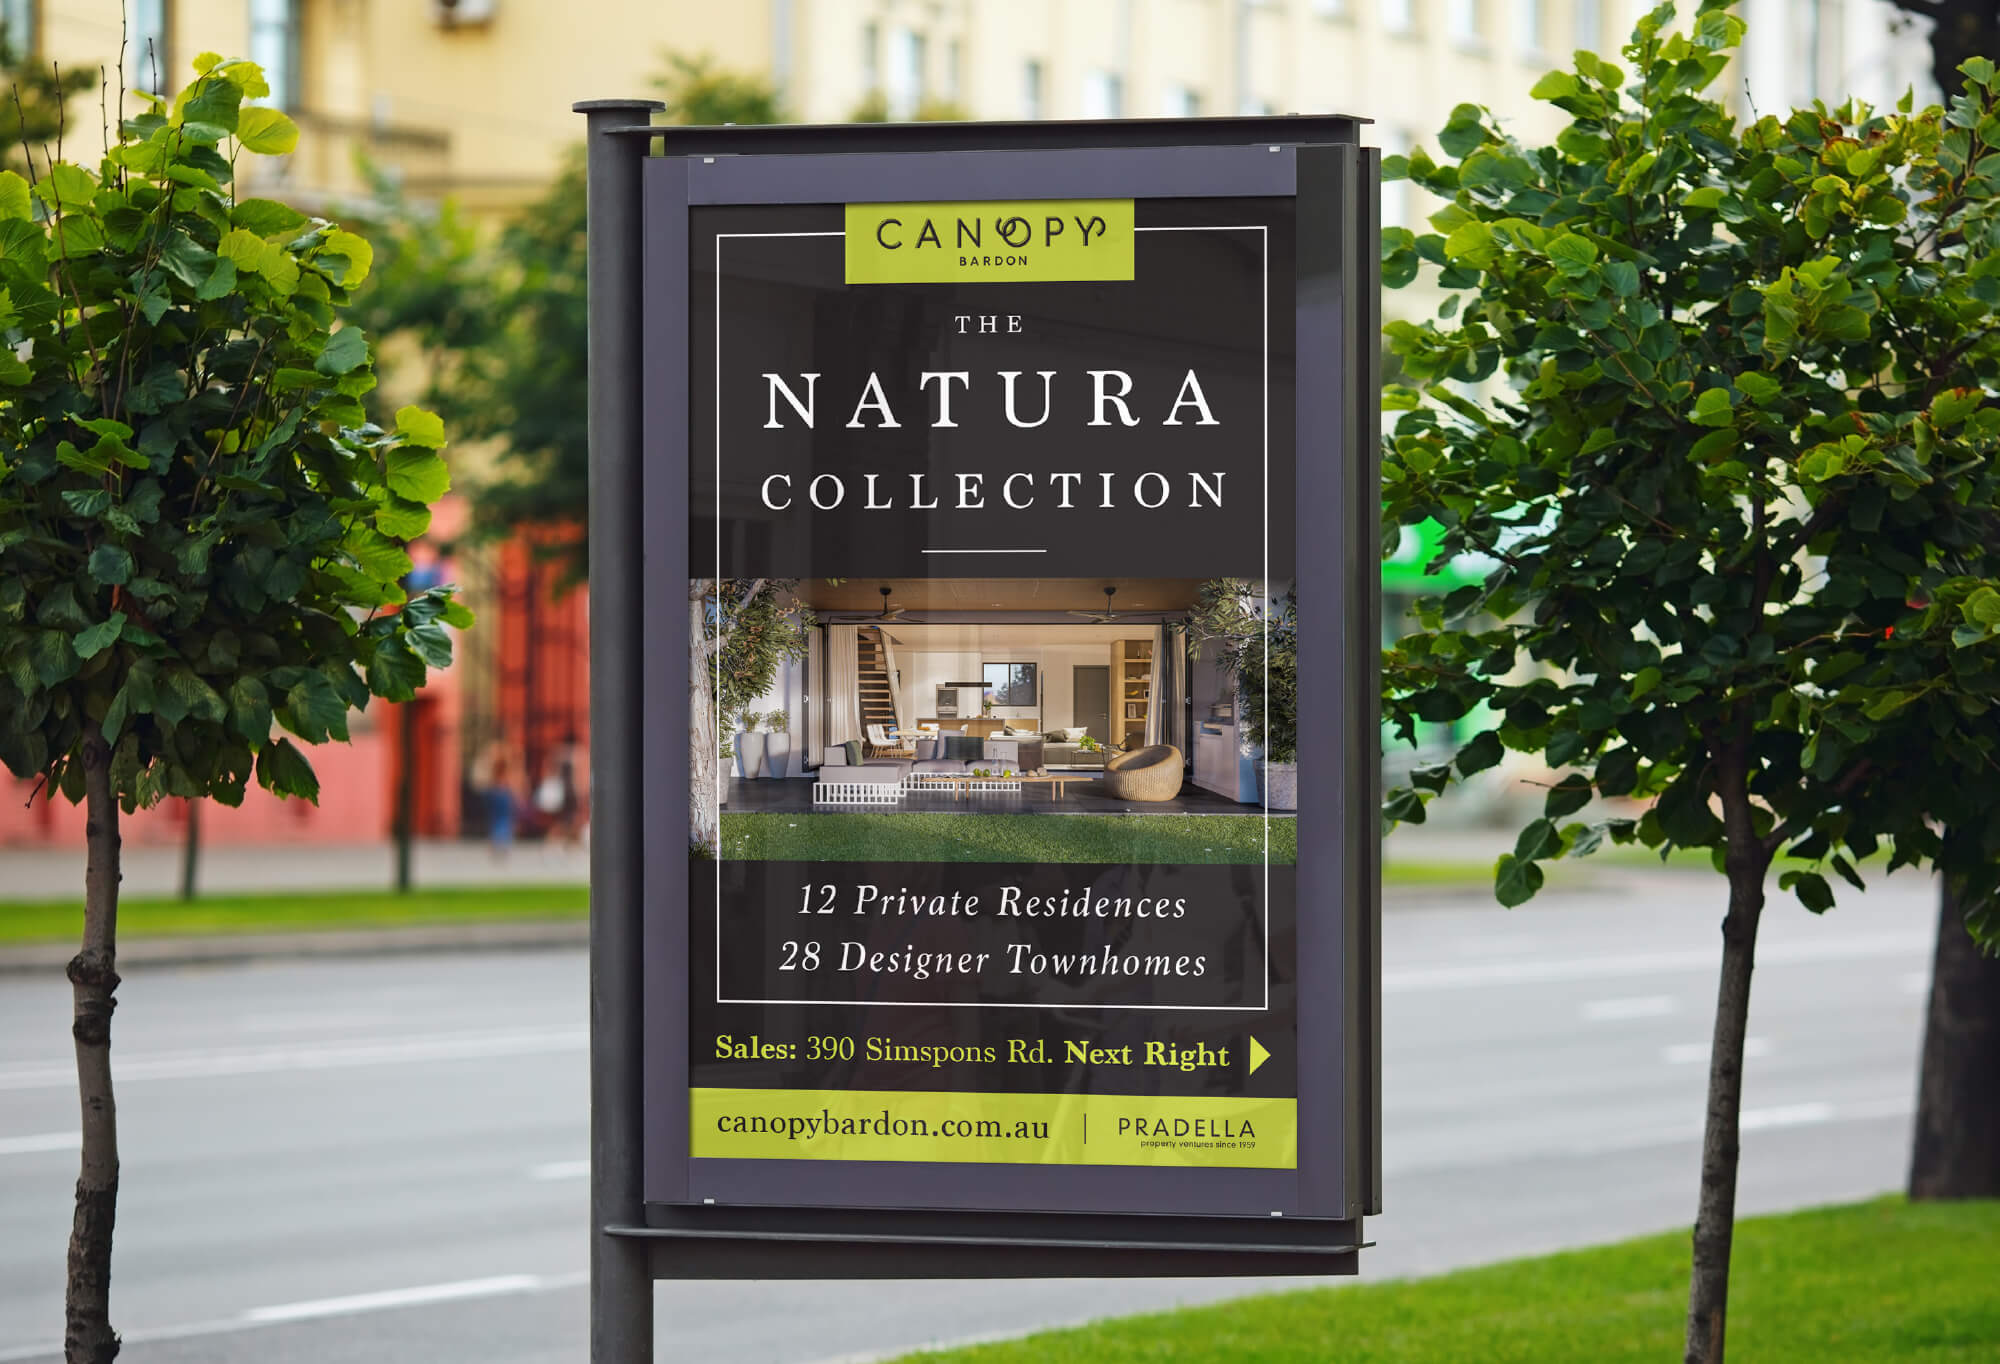 The Natura Collection